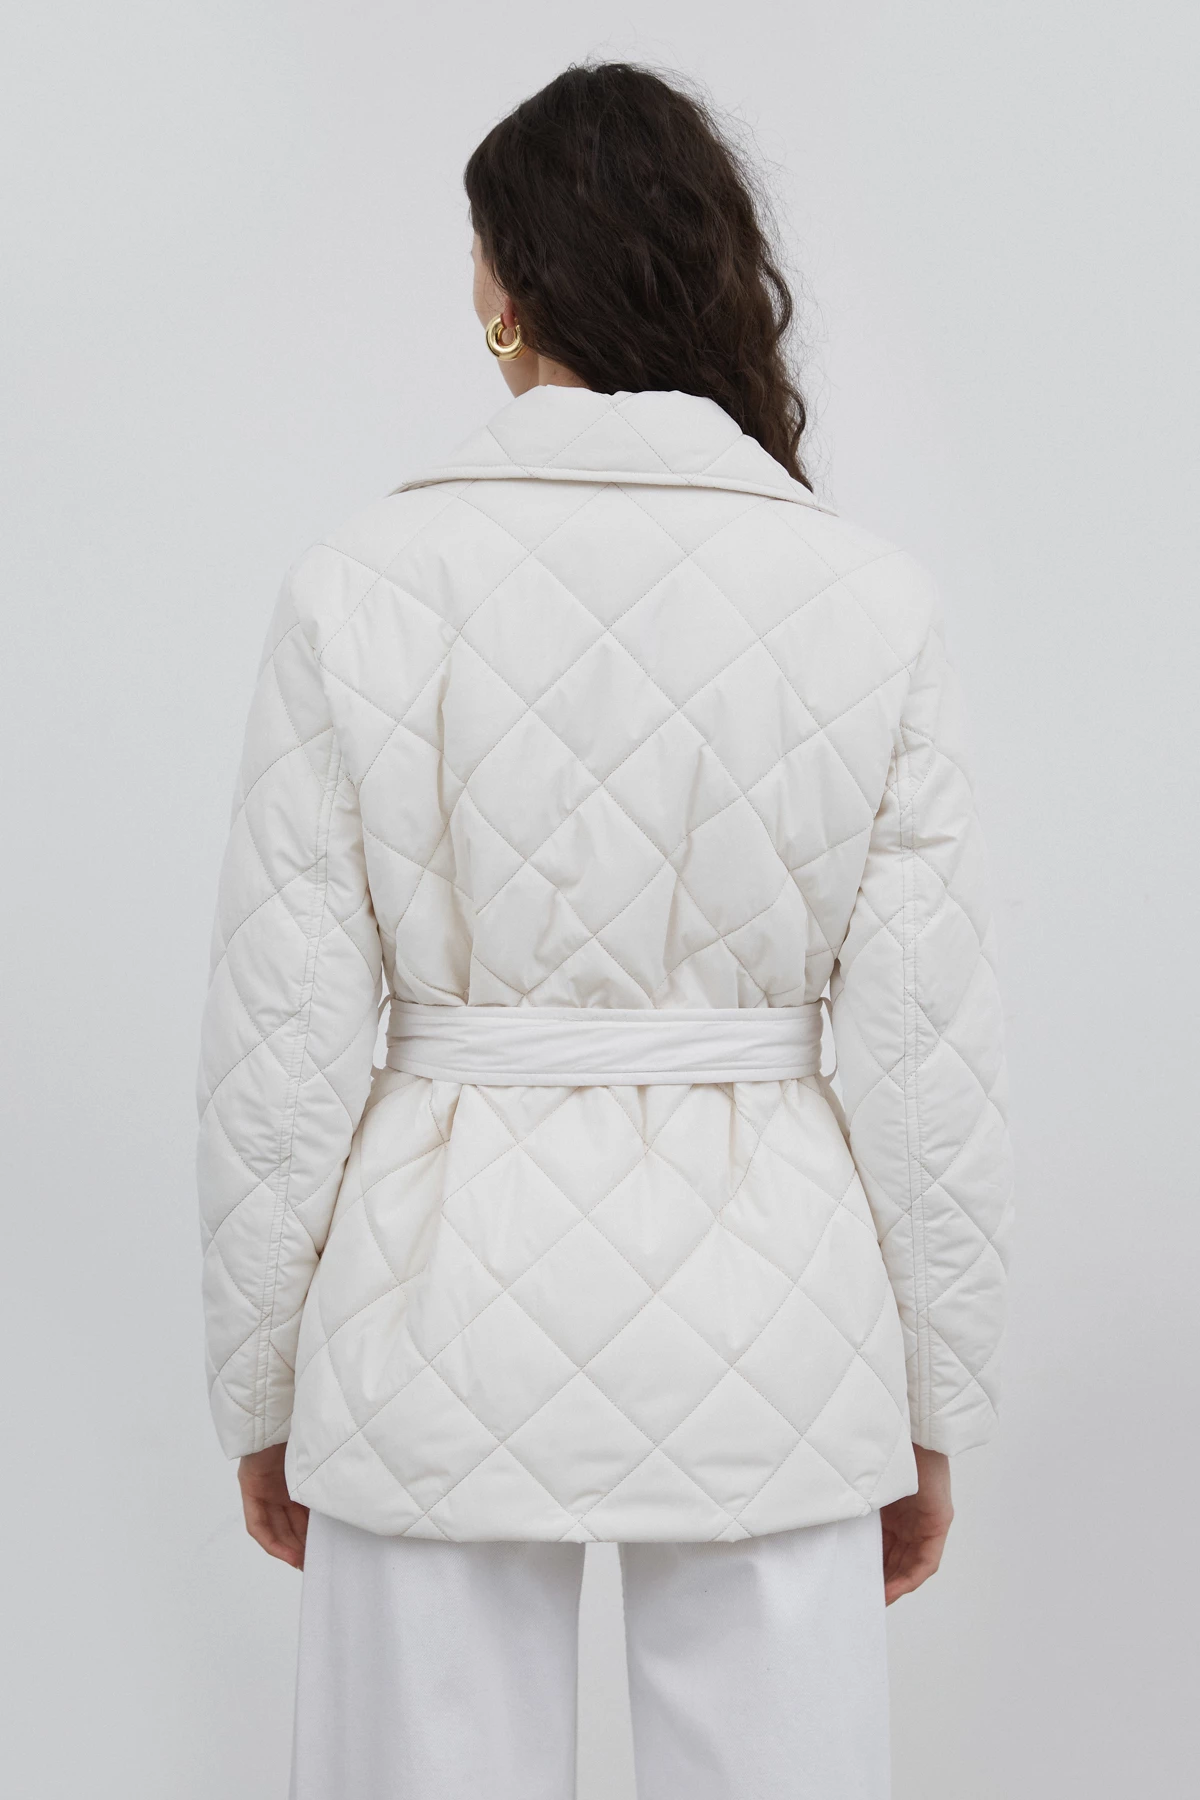 Milky quilted jacket with padding and belt, photo 8